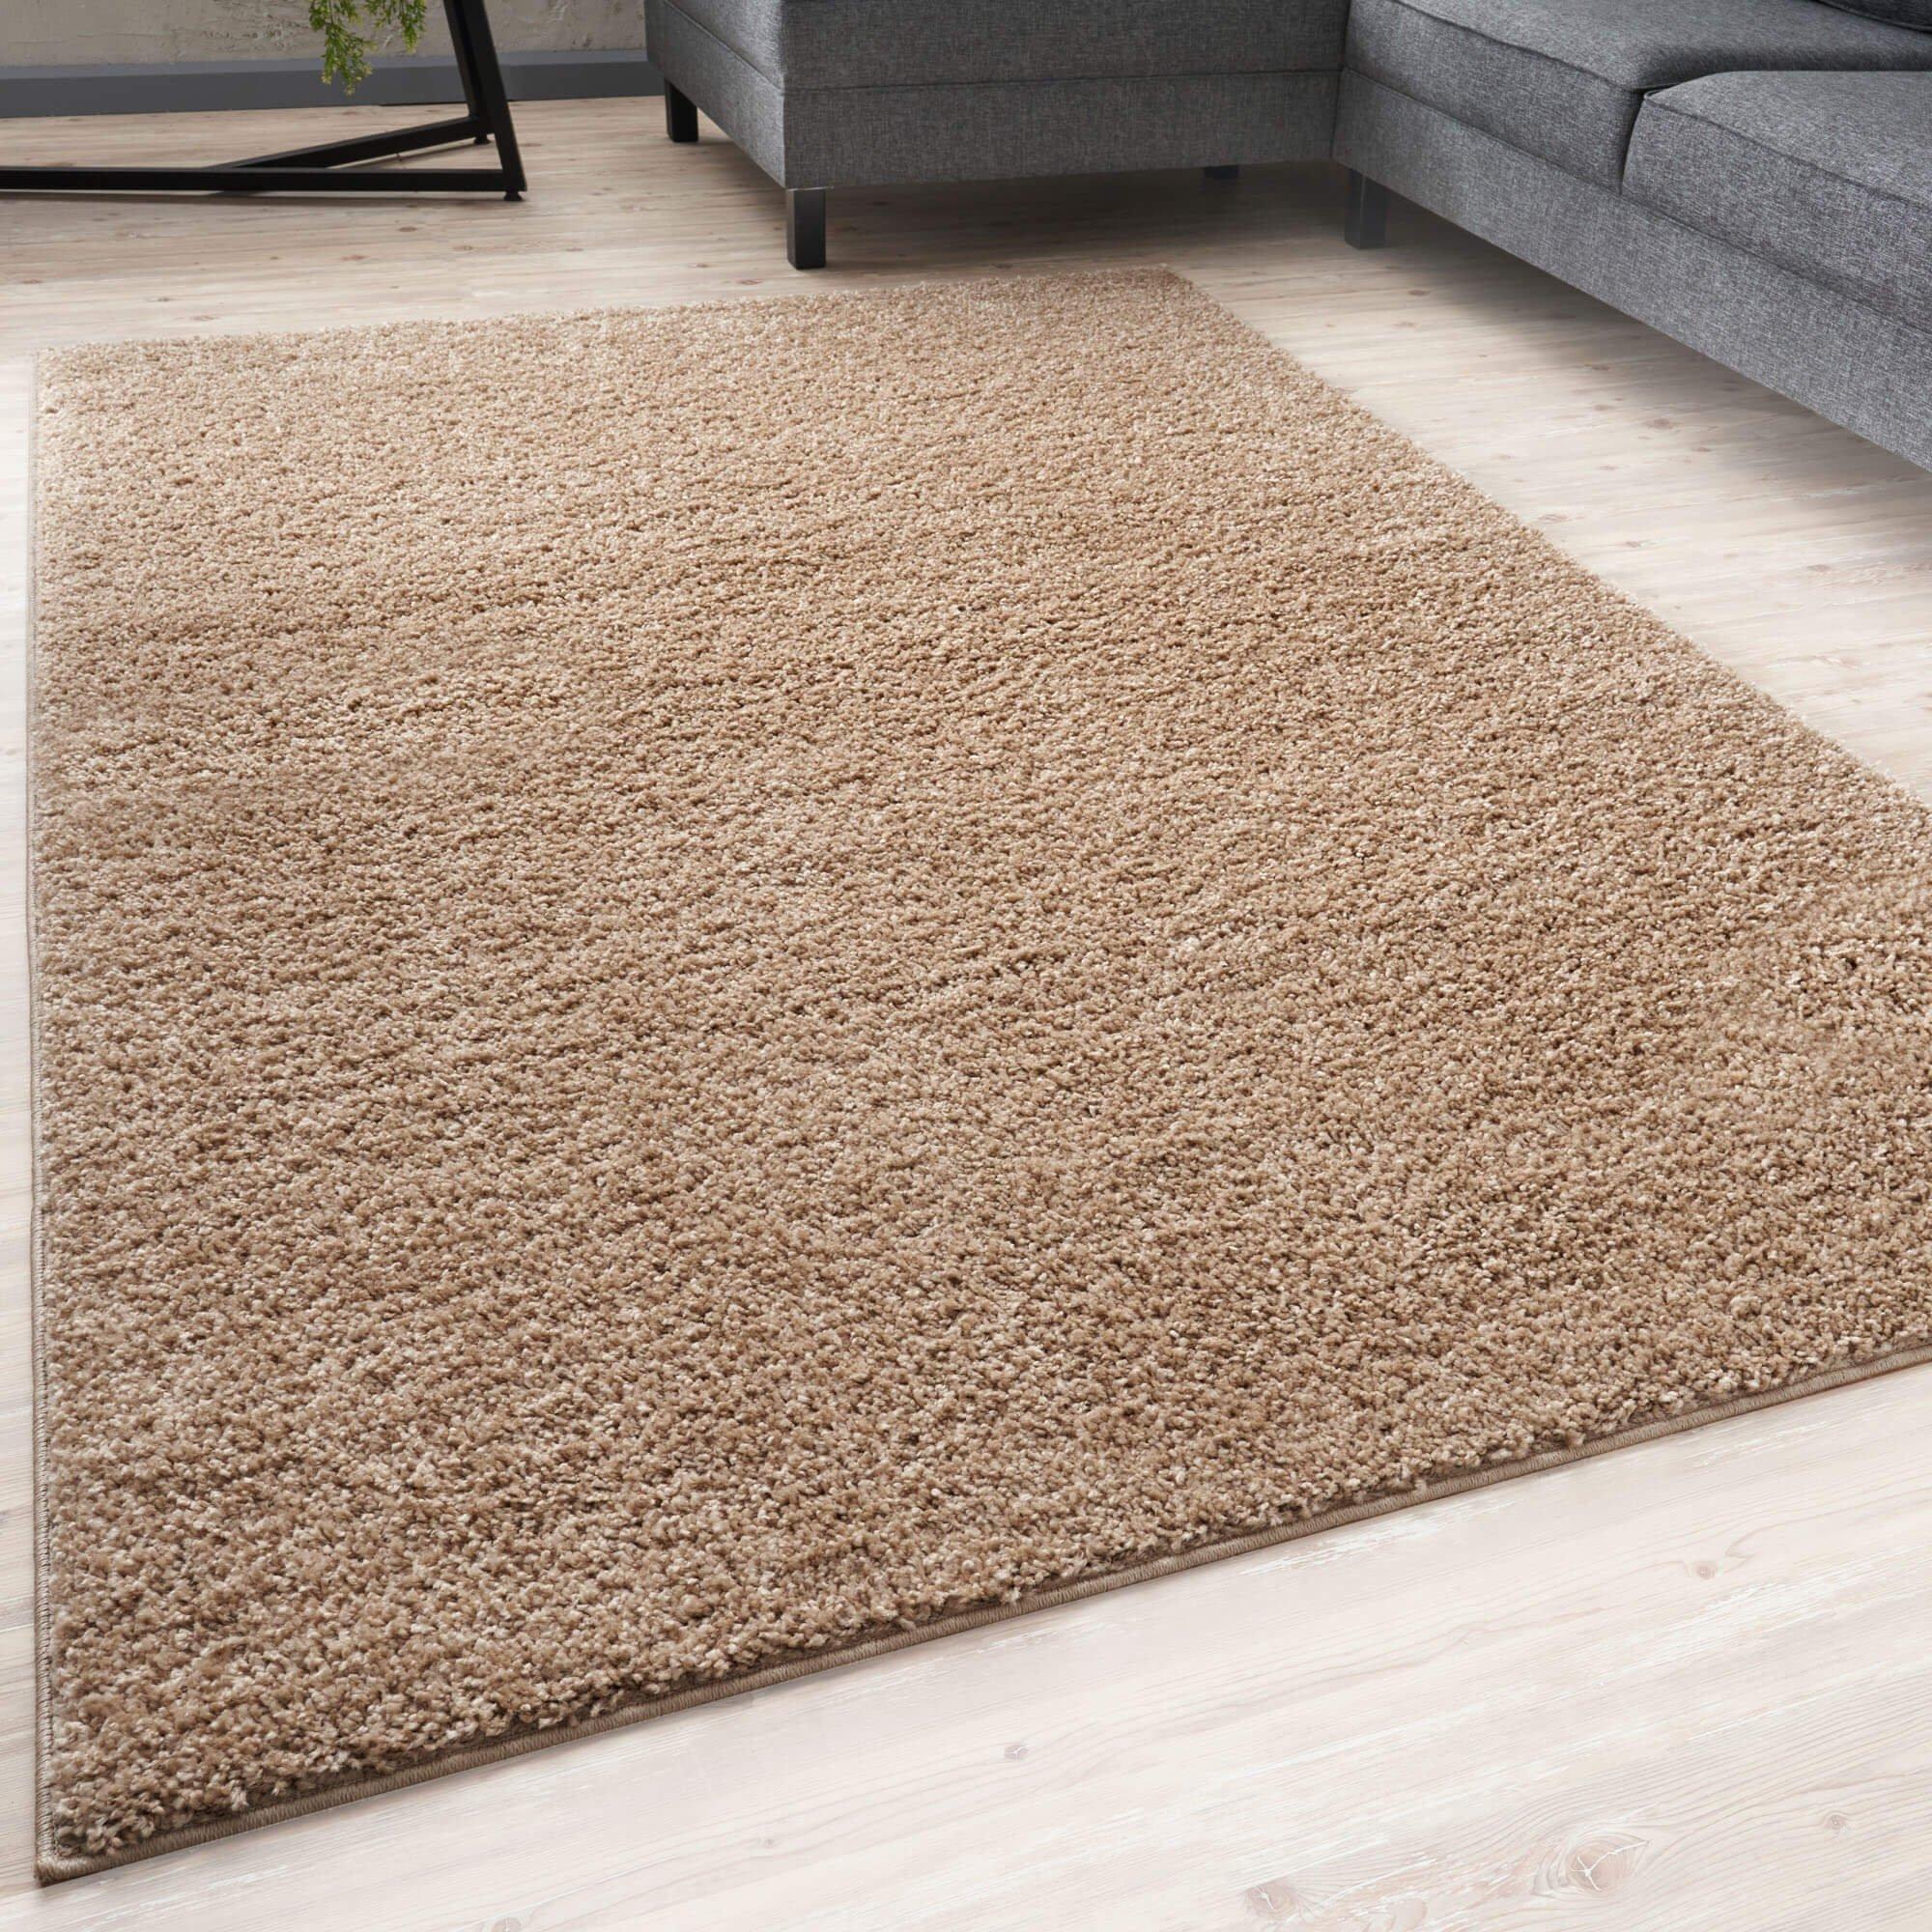 Myshaggy Collection Rugs Solid Design in Beige